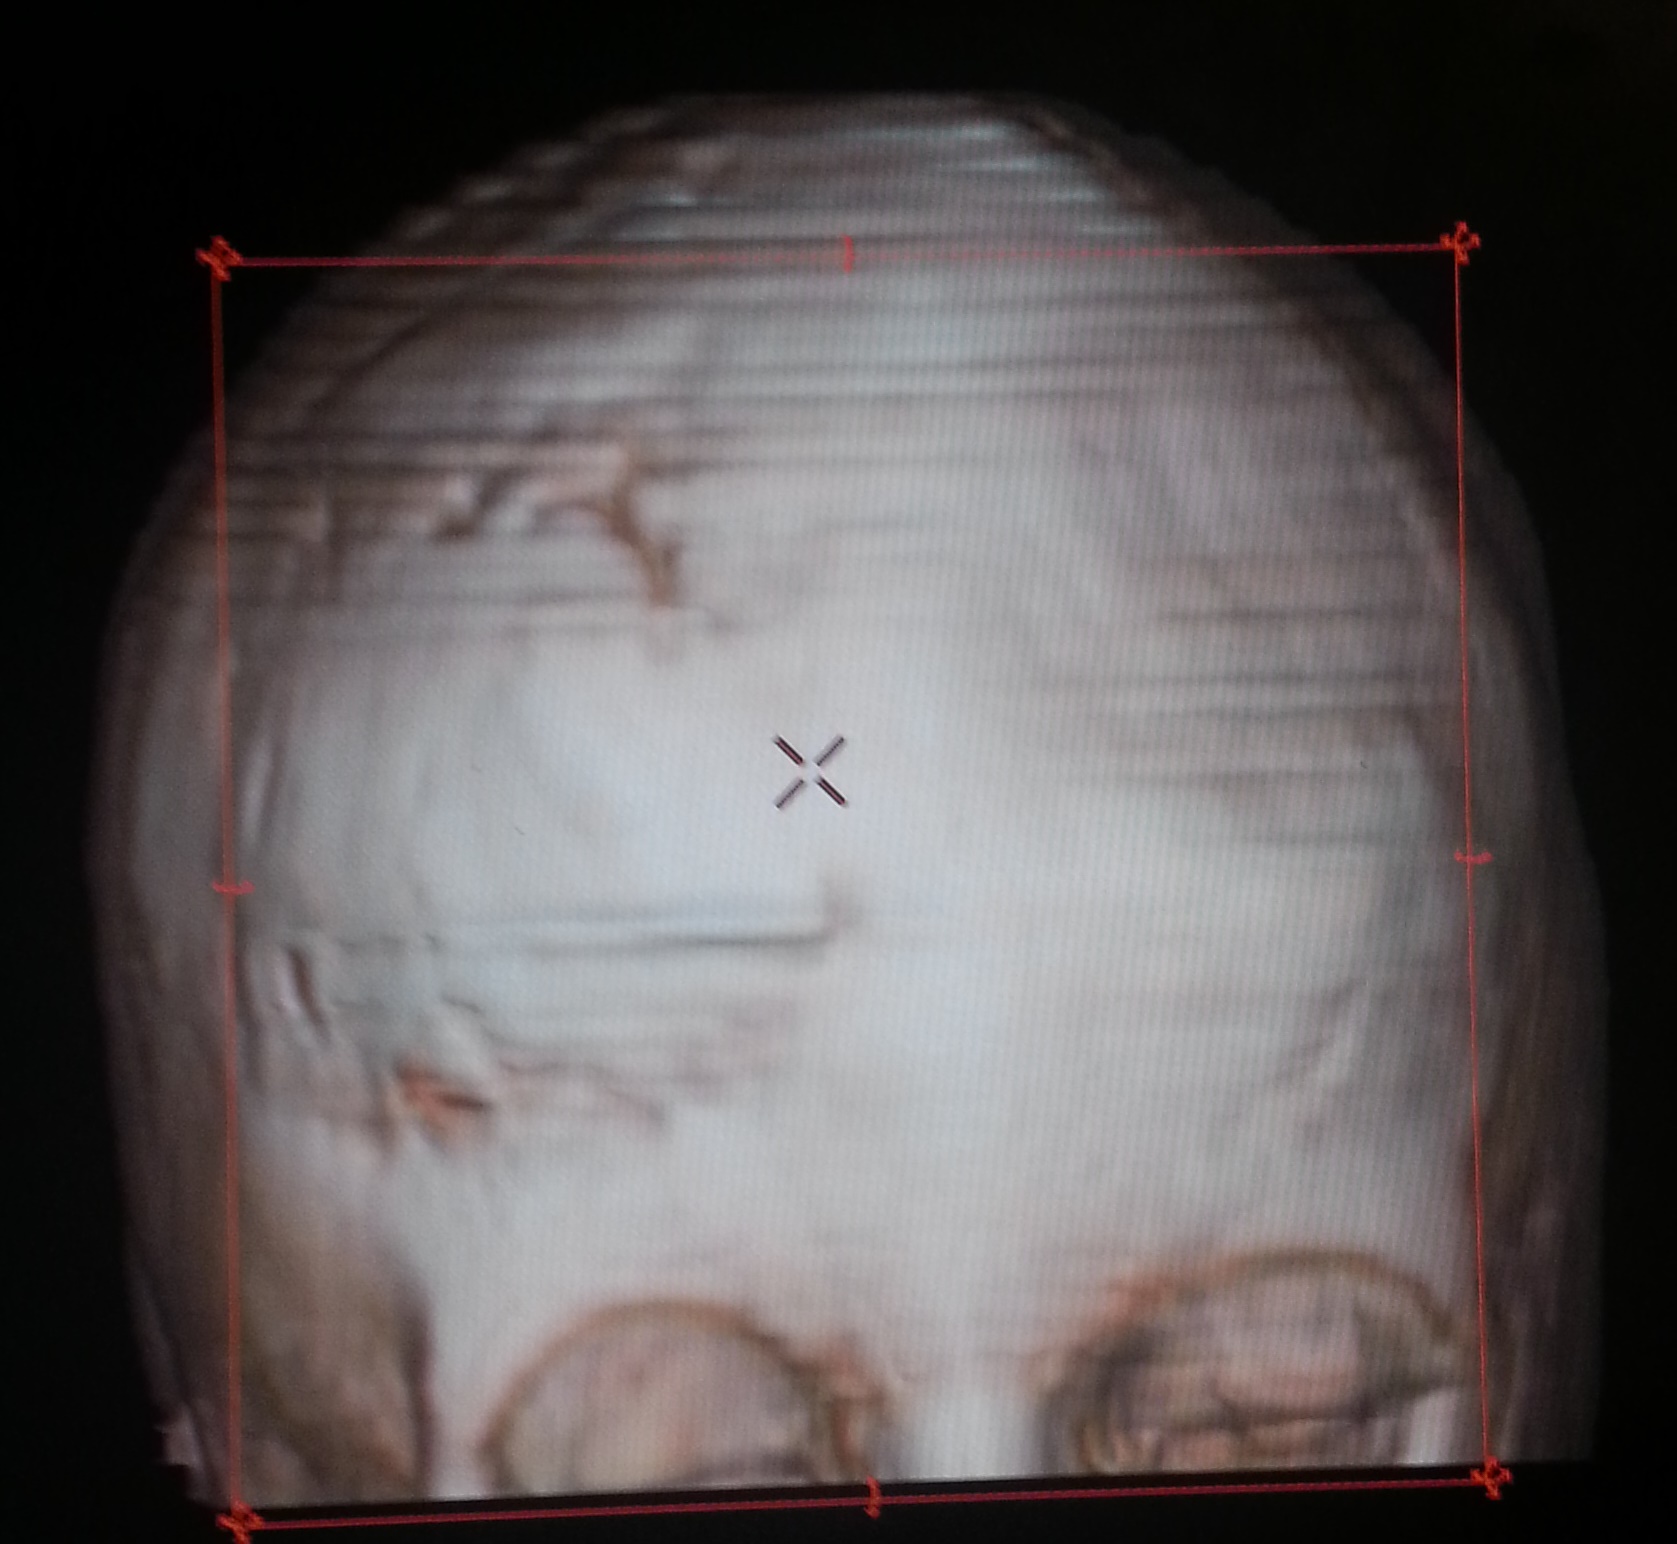 Three-dimentional CT, 5 years after craniotomy and remodelling for coronal synostosis, showing good skull shape.